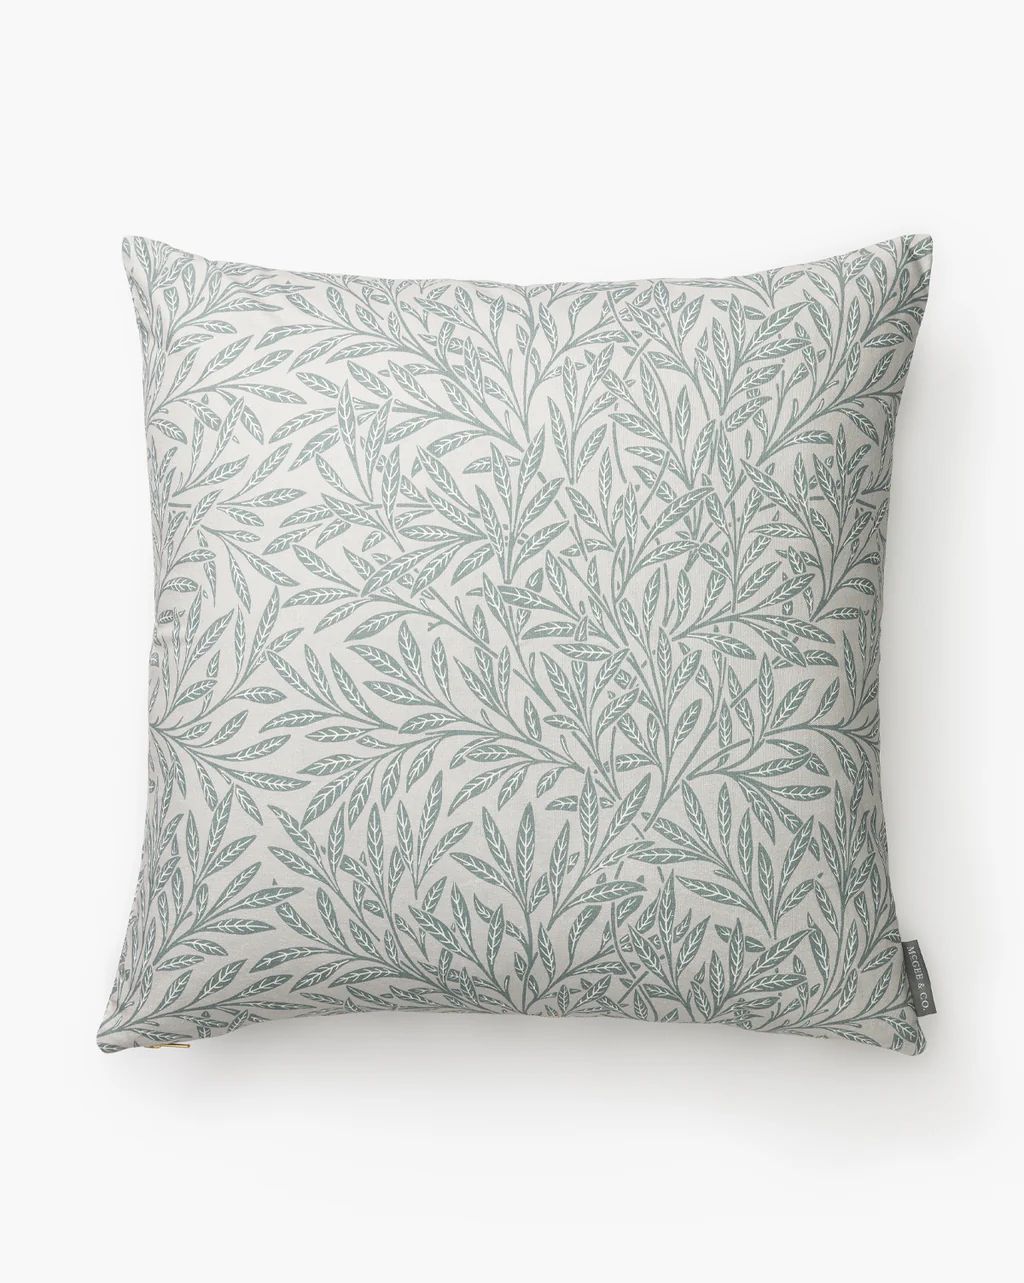 Morris & Co. x McGee & Co. Willow Pillow Cover | McGee & Co. (US)